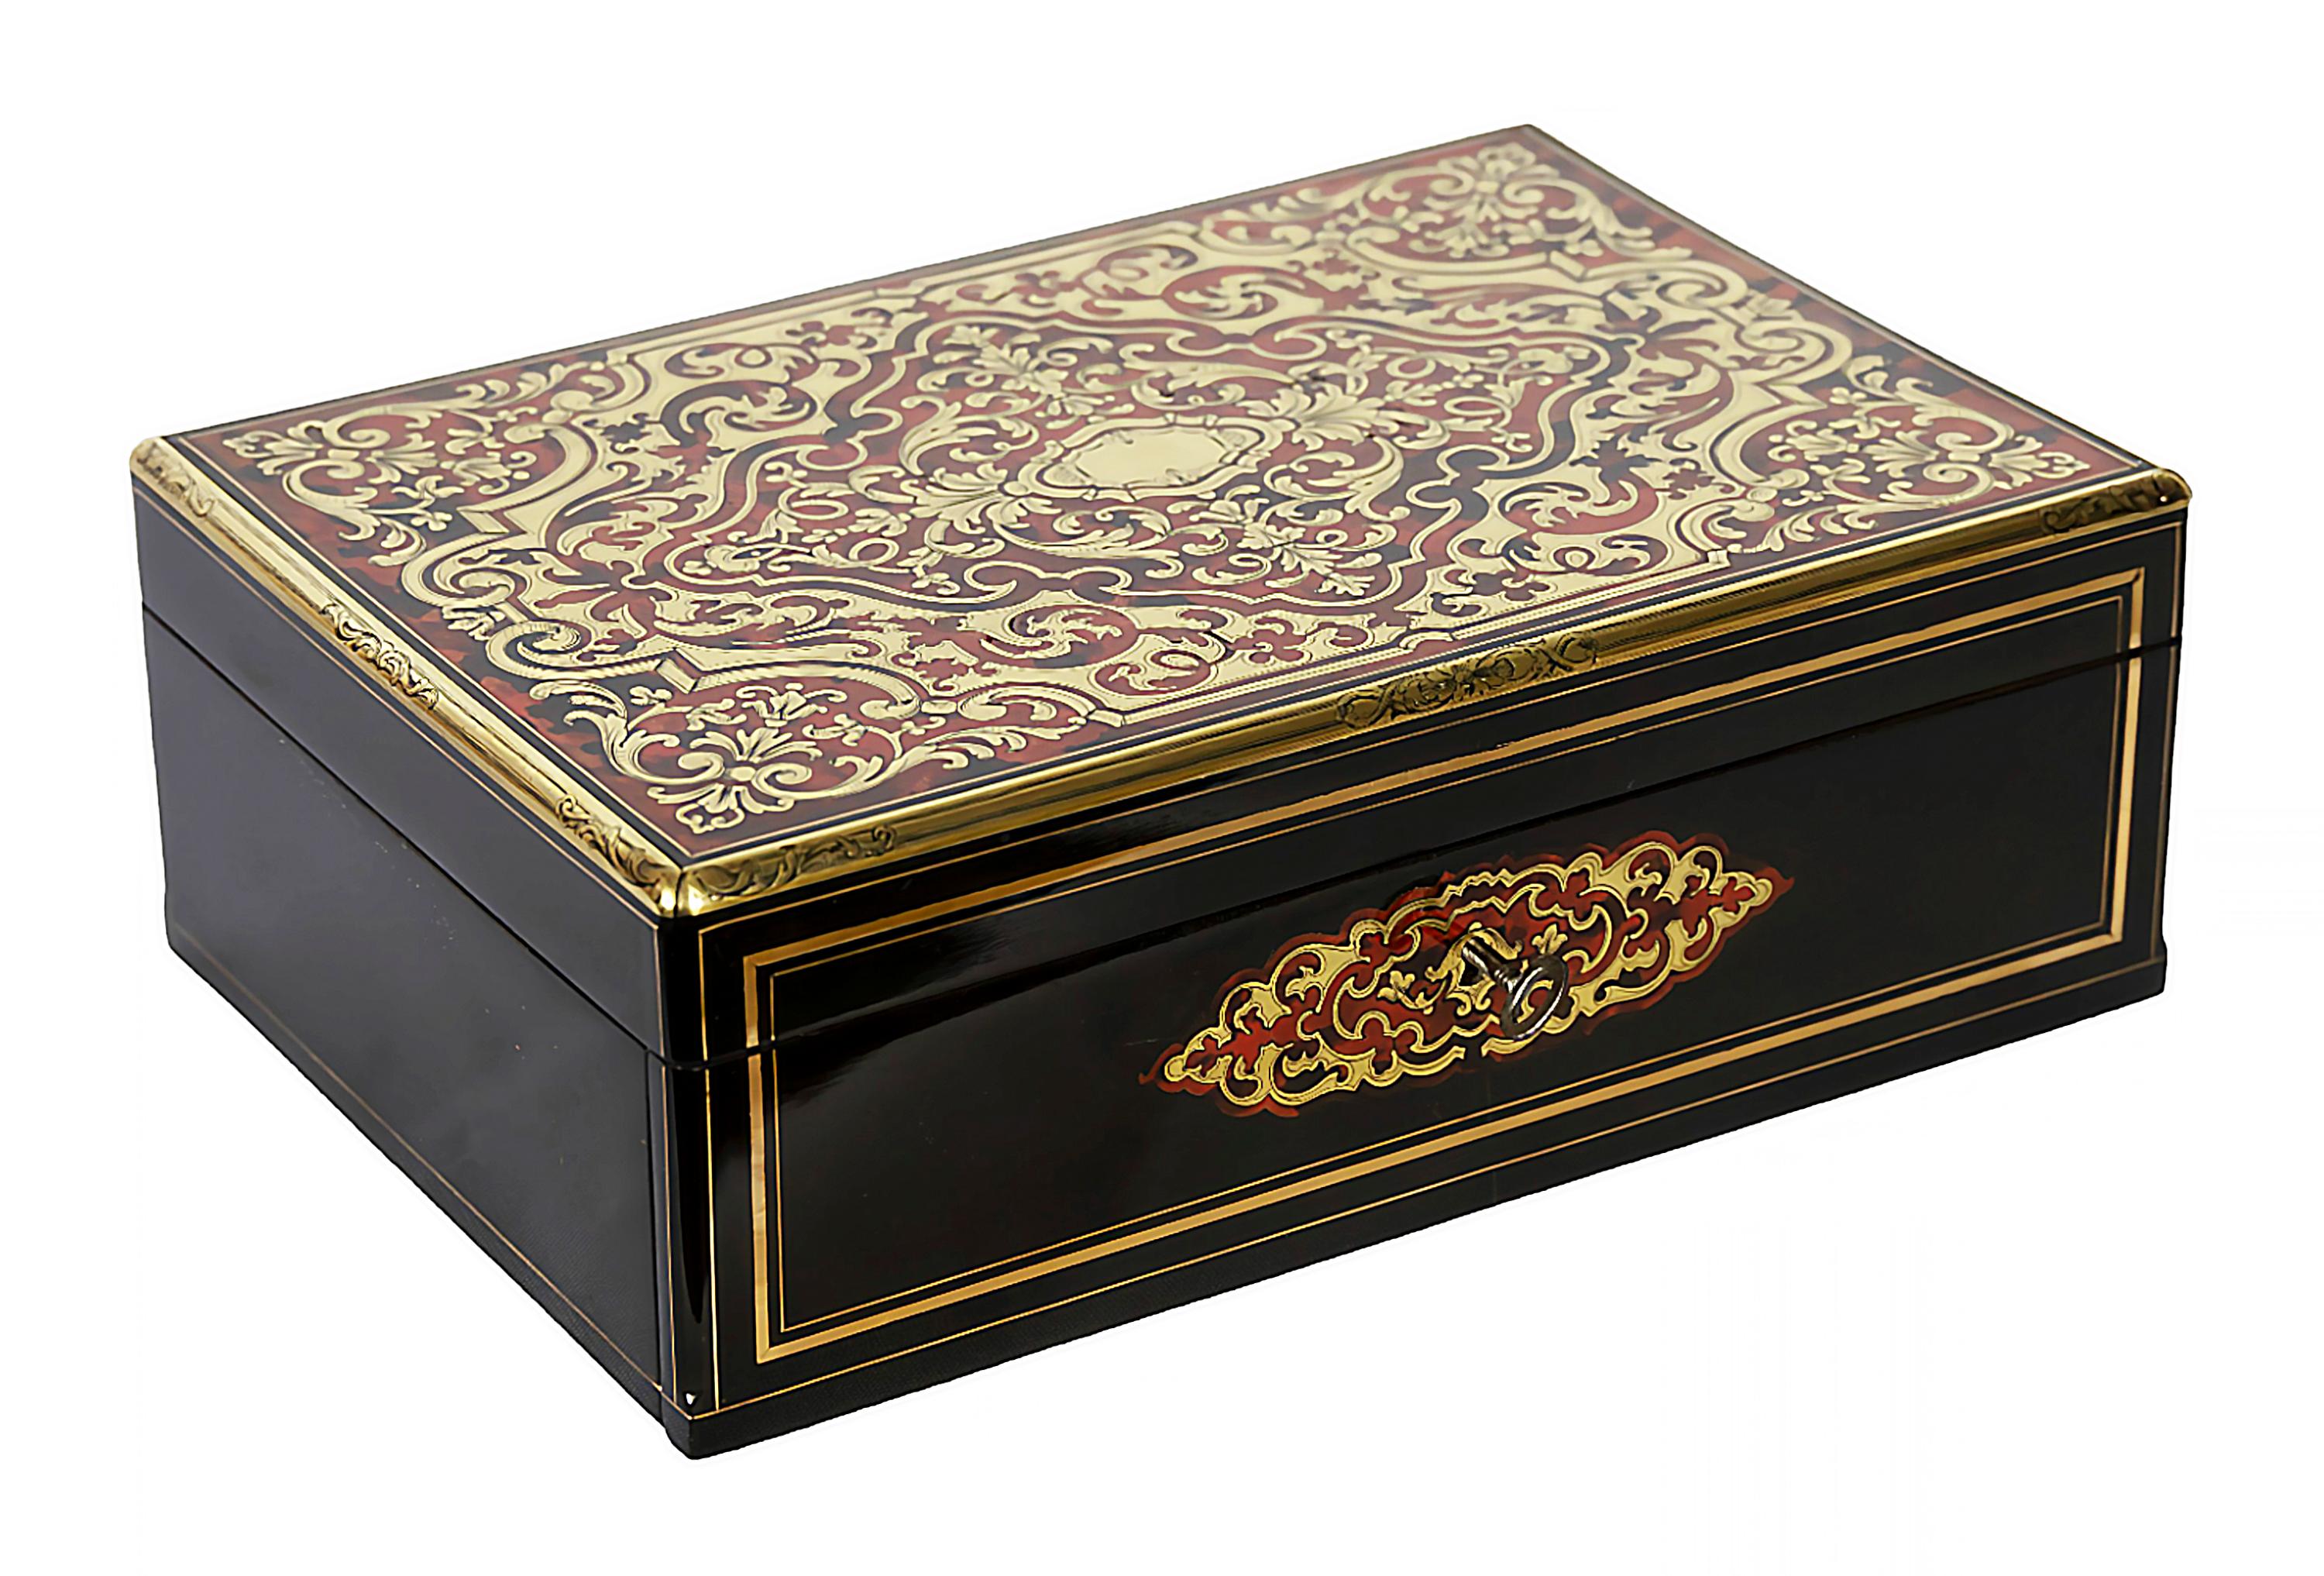 Antique 19th century French Boulle/Napoleon III marquetry box.
The wooden box is decorated with inlaid brass and tortoiseshell and red silk textile inside.
Including key.
Signed: Audige 40 Place de la Bourse.
After high quality renovation.
Very good